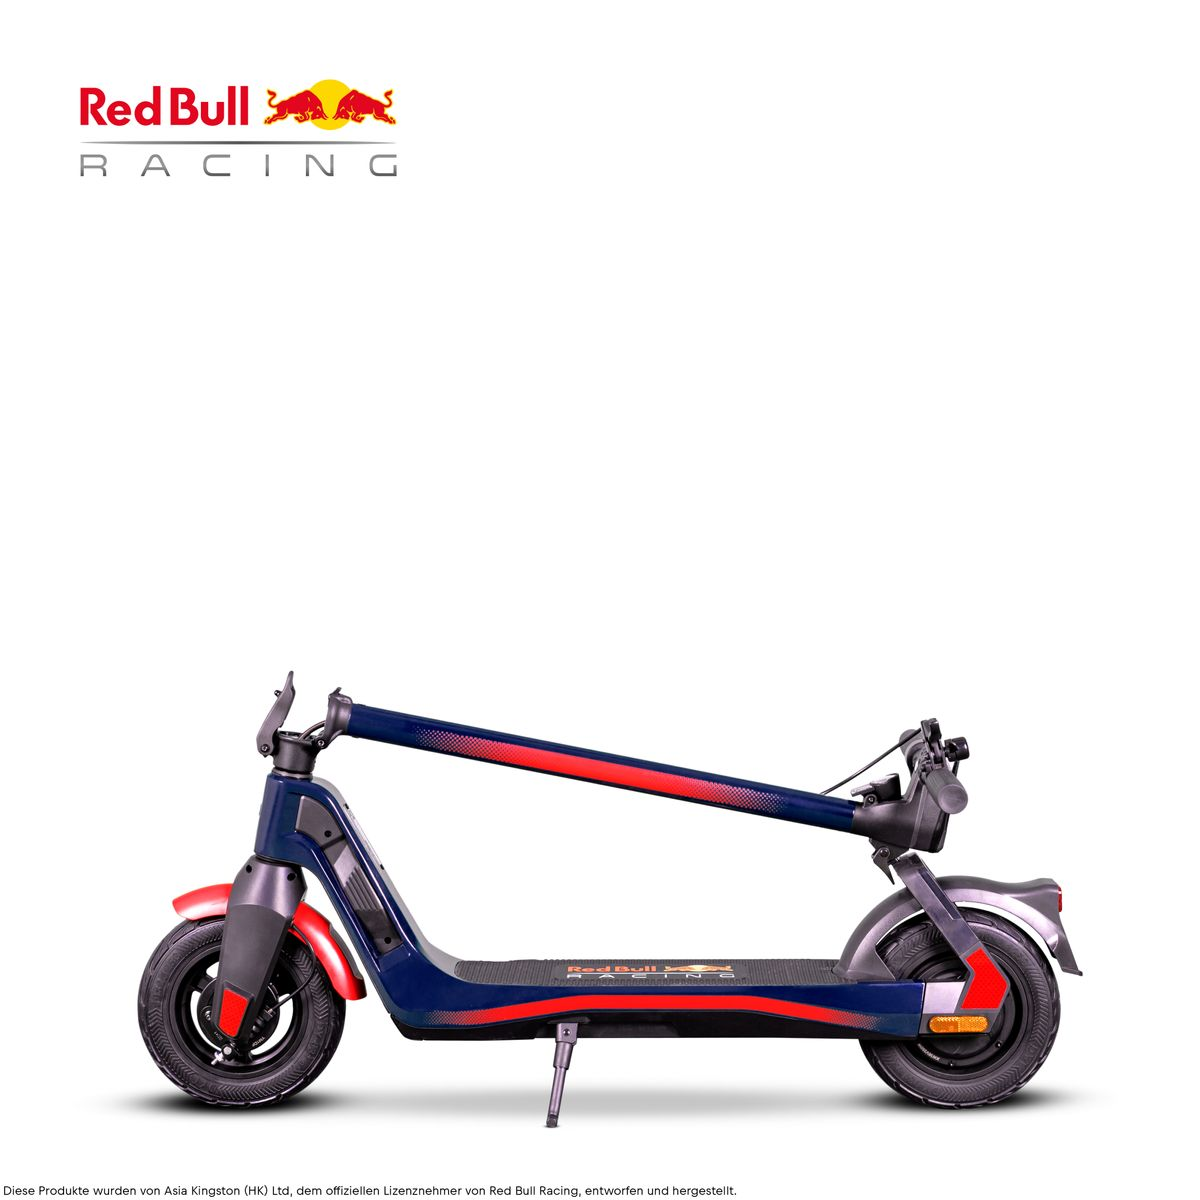 RED BULL E-Scooter Zoll, (10 RS Racing Blau-Rot) 1000